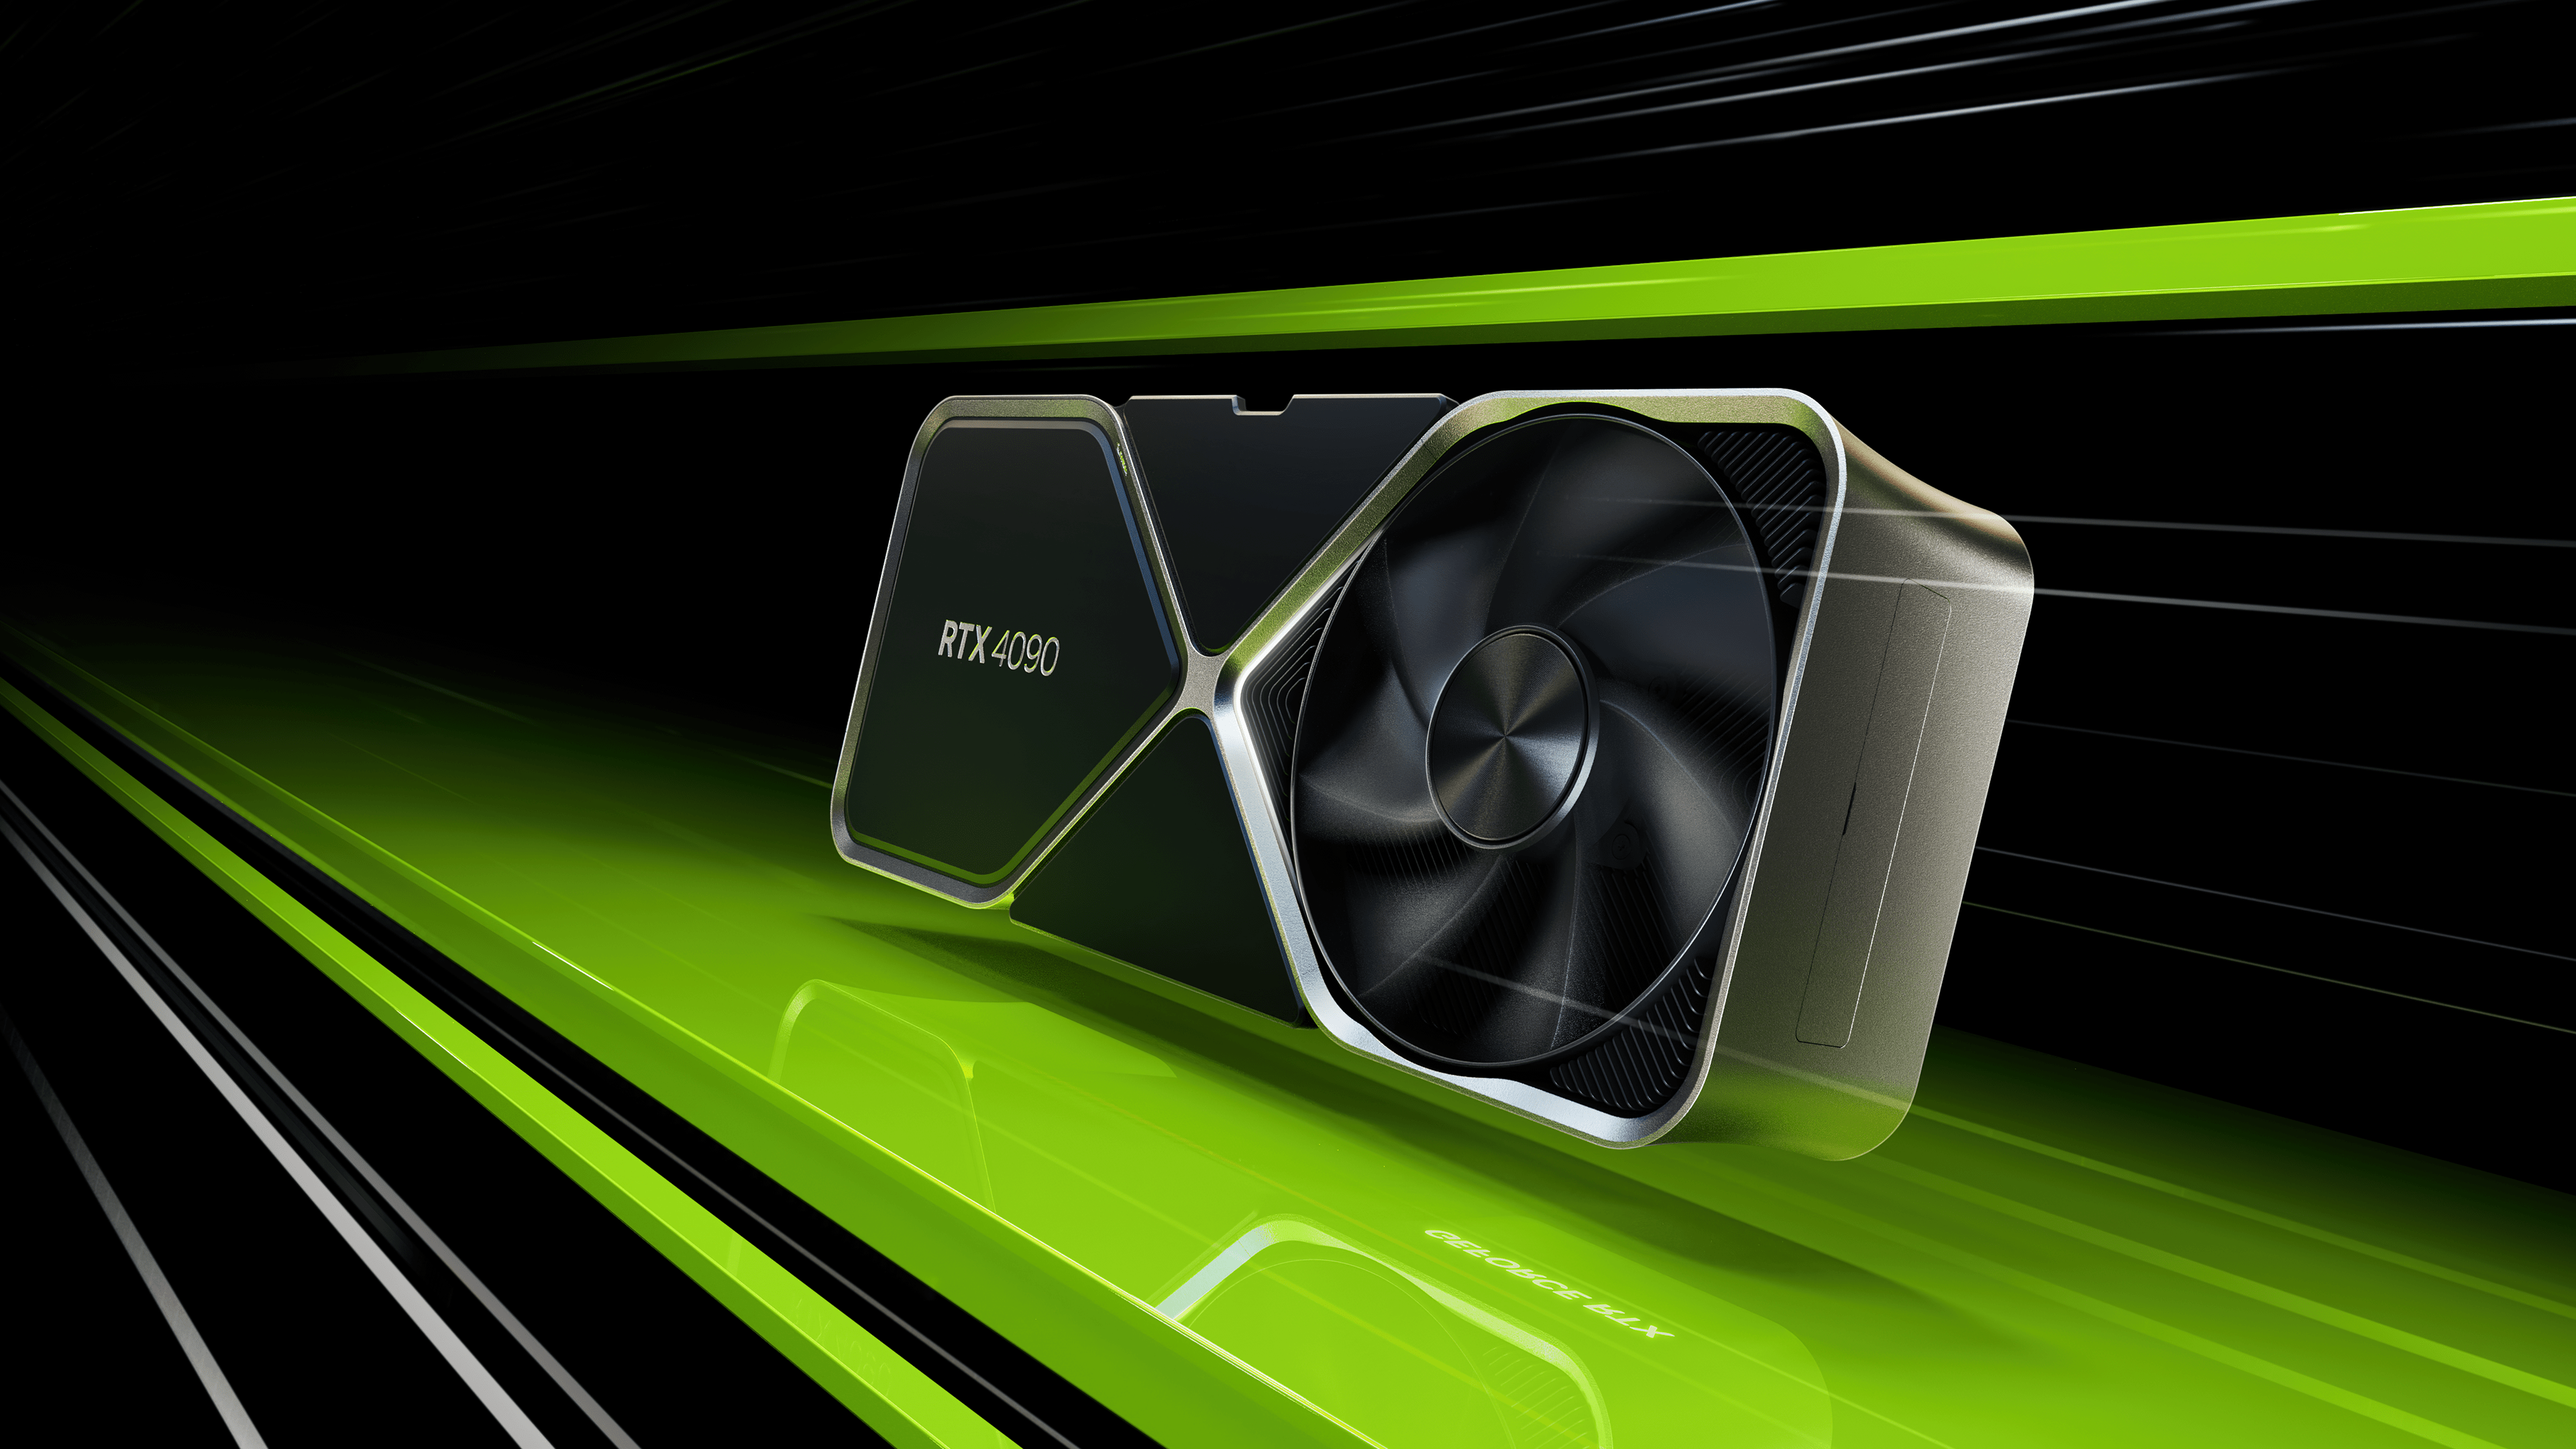 Nvidia: What do Geforce RTX 4080 and 4090 bring to VR gaming?